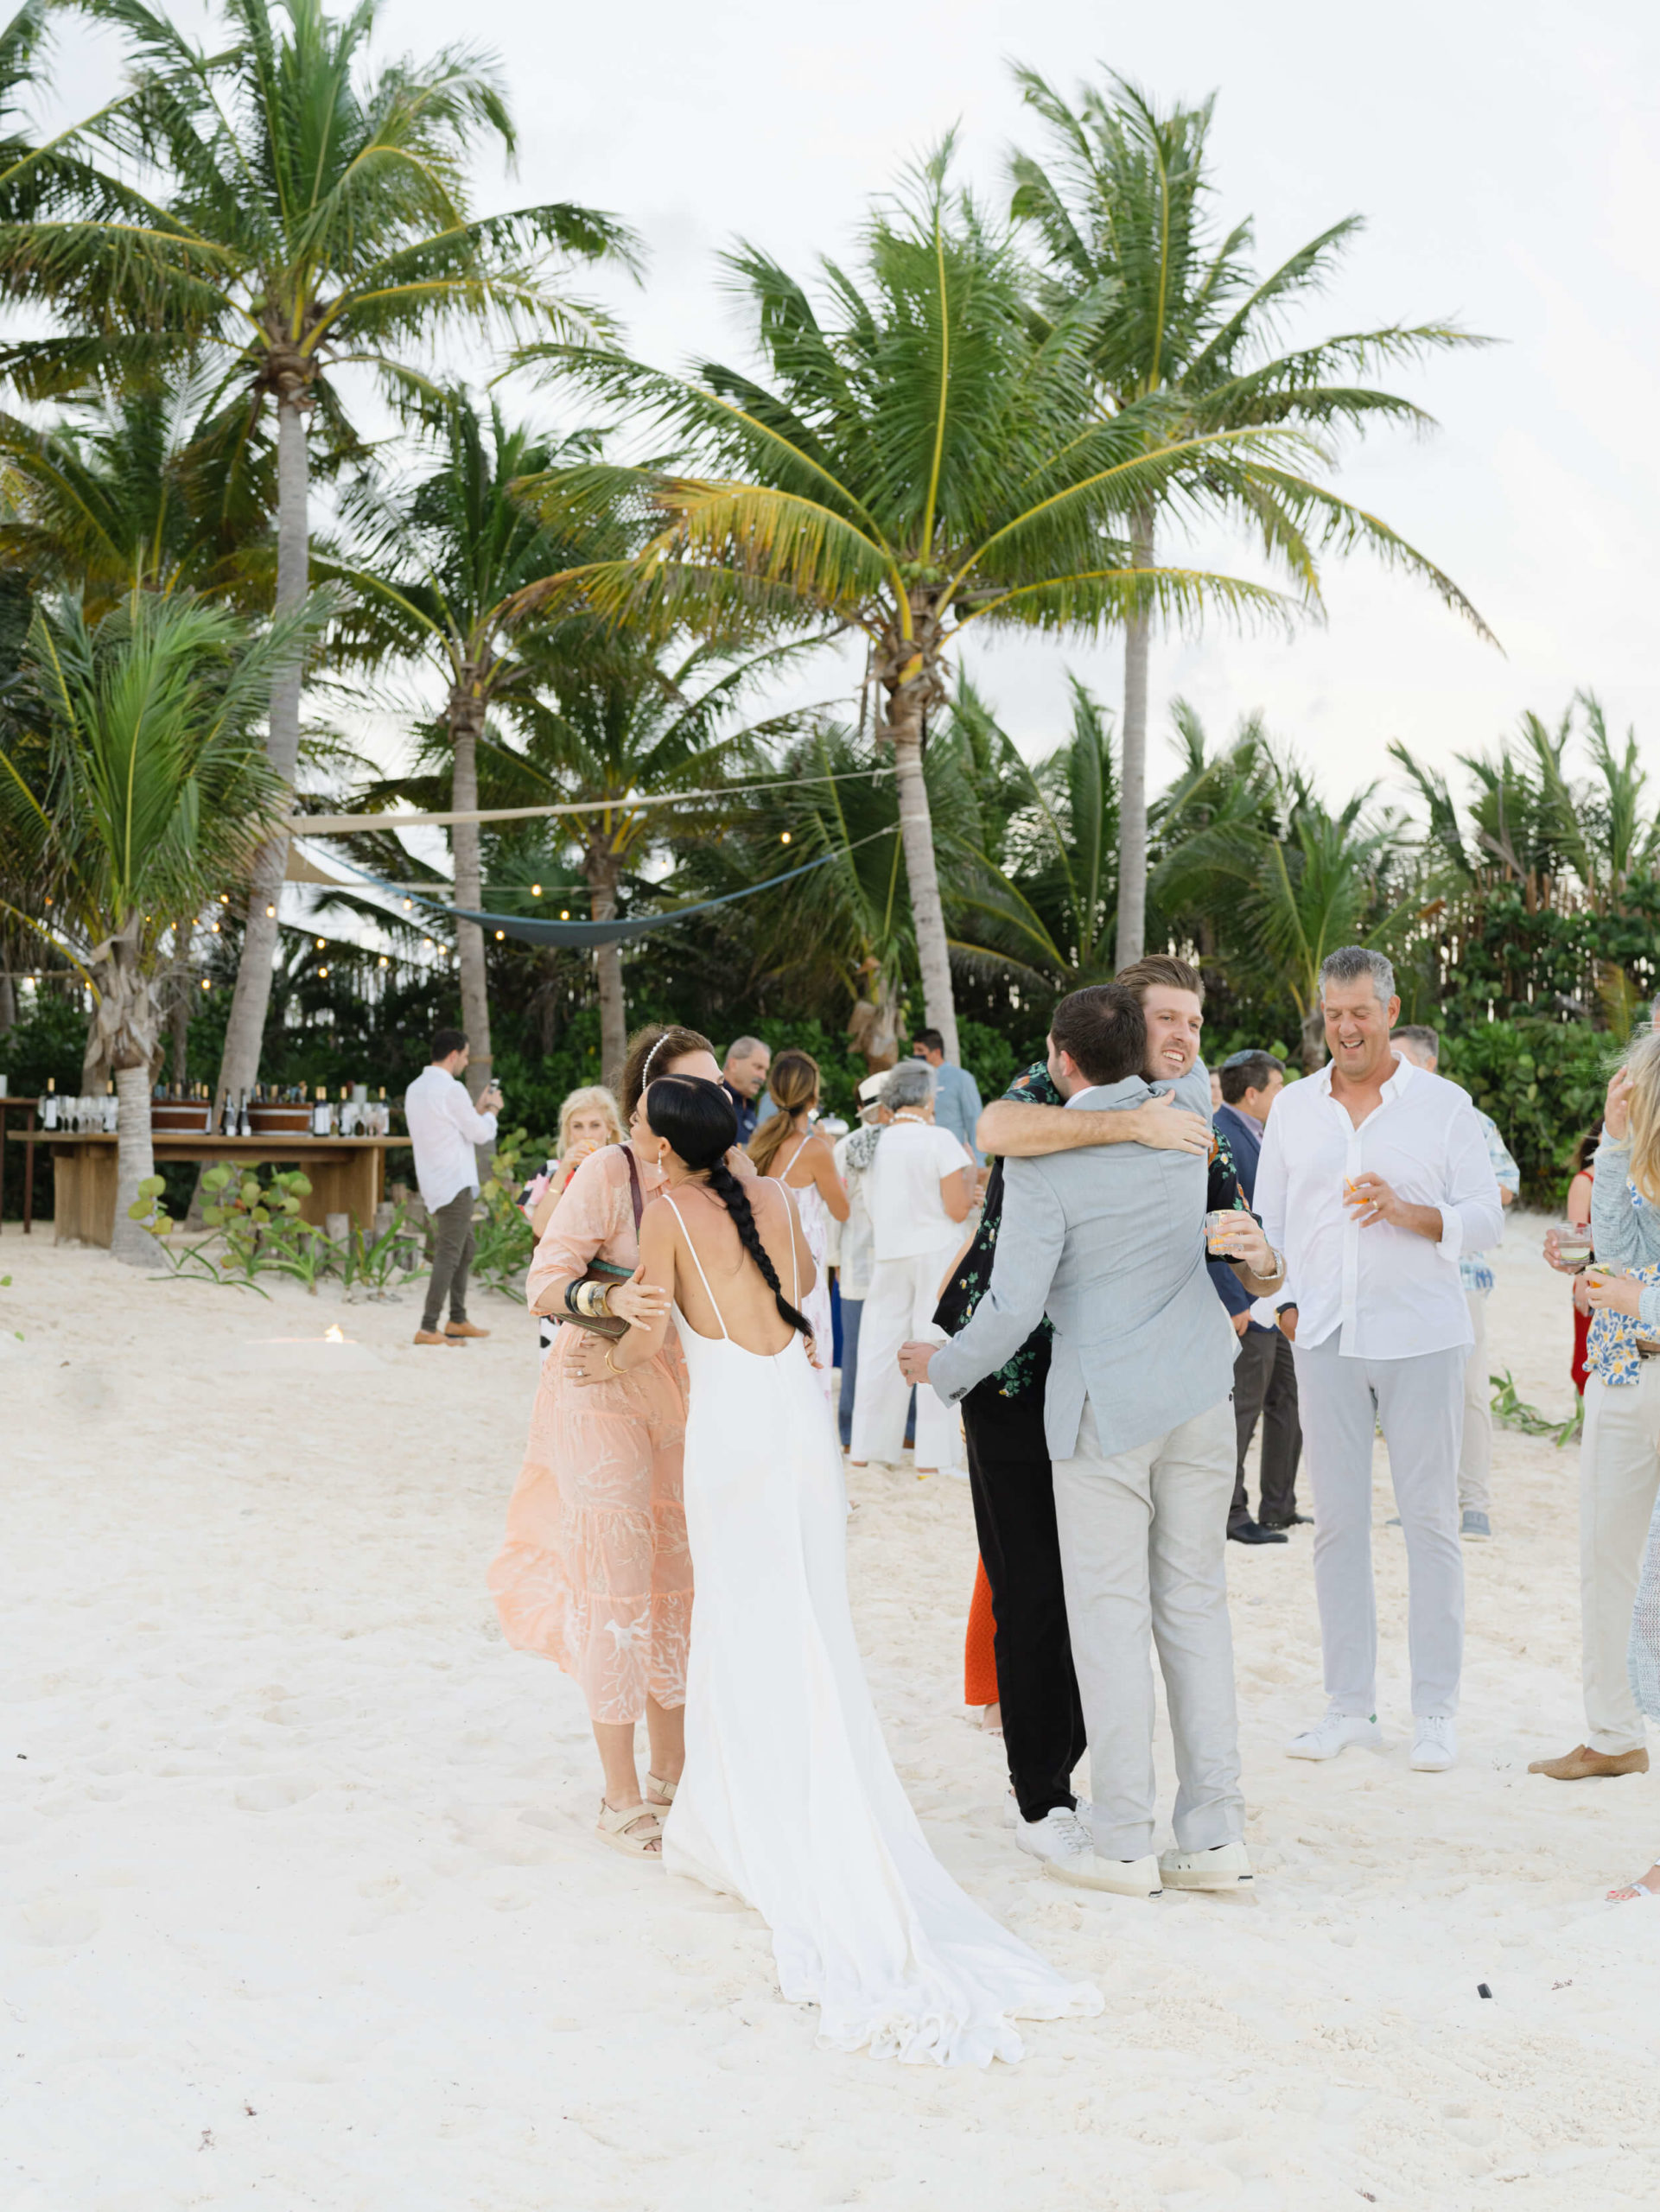 Danielle and Lucas embracing their friends and family at their Rosewood Mayakoba wedding